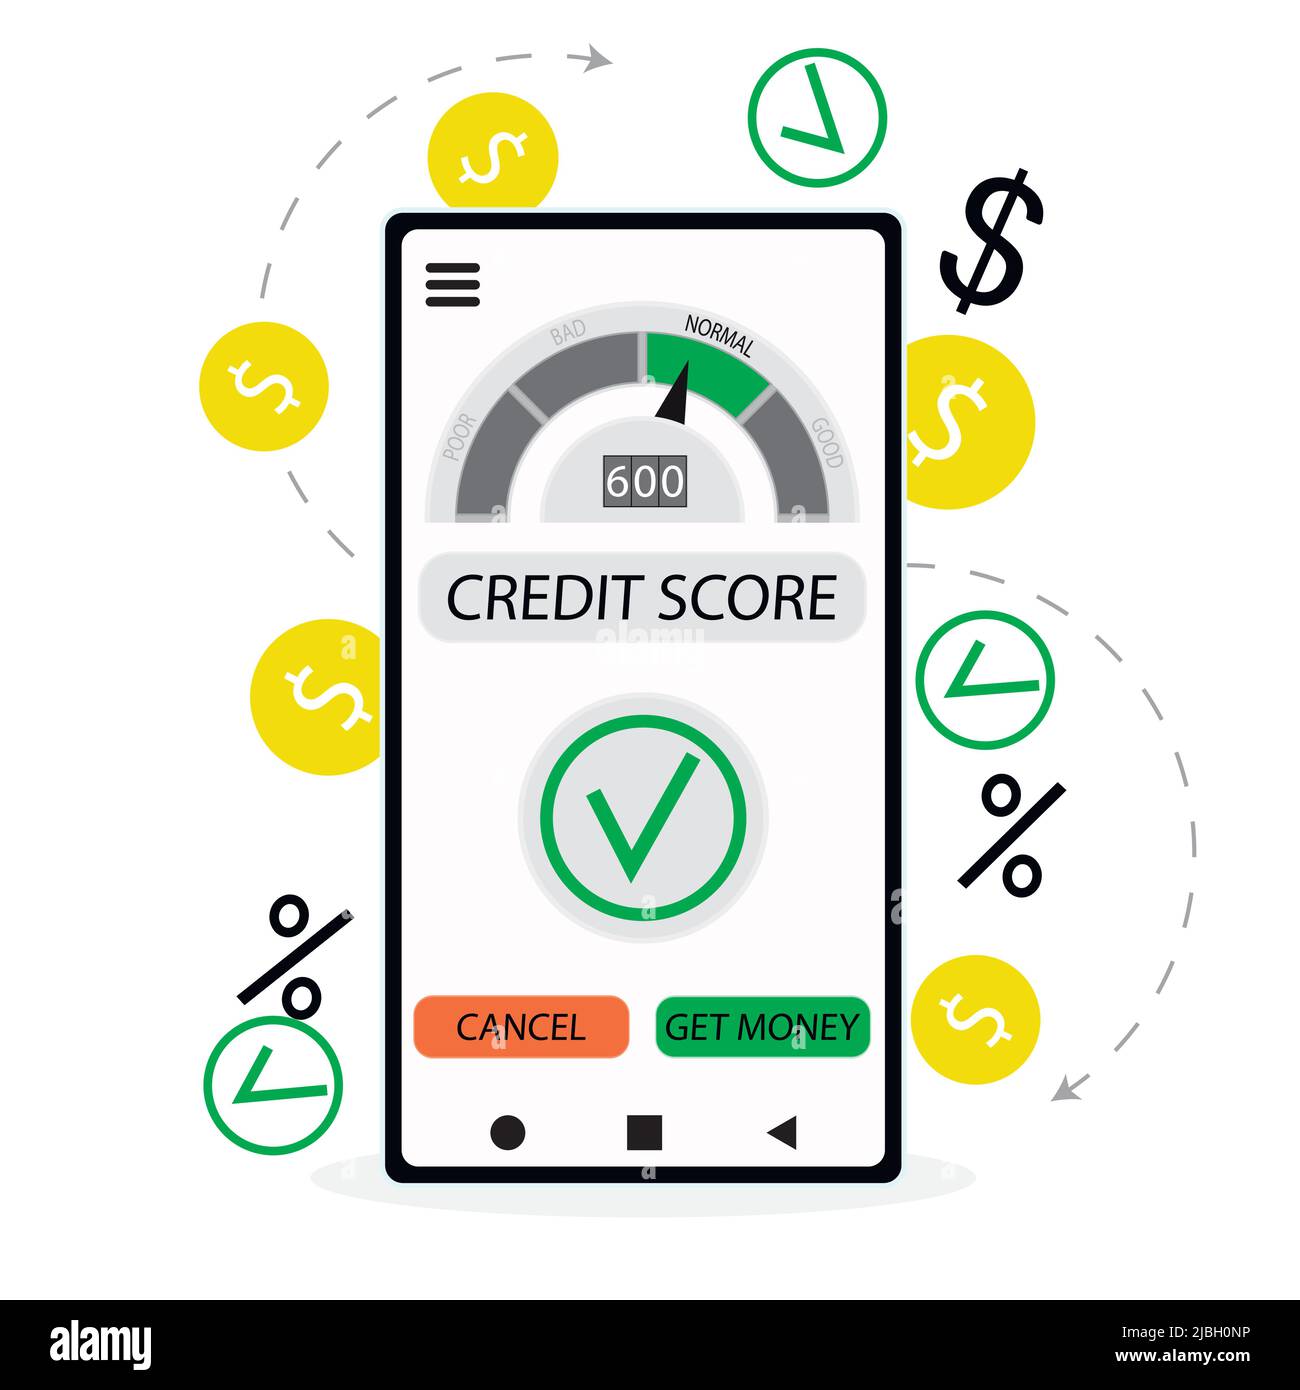 Approved loan, good credit score rating in internet banking. Illustration vector. repaid loan, good financial condition, user indebtedness, loan appli Stock Vector